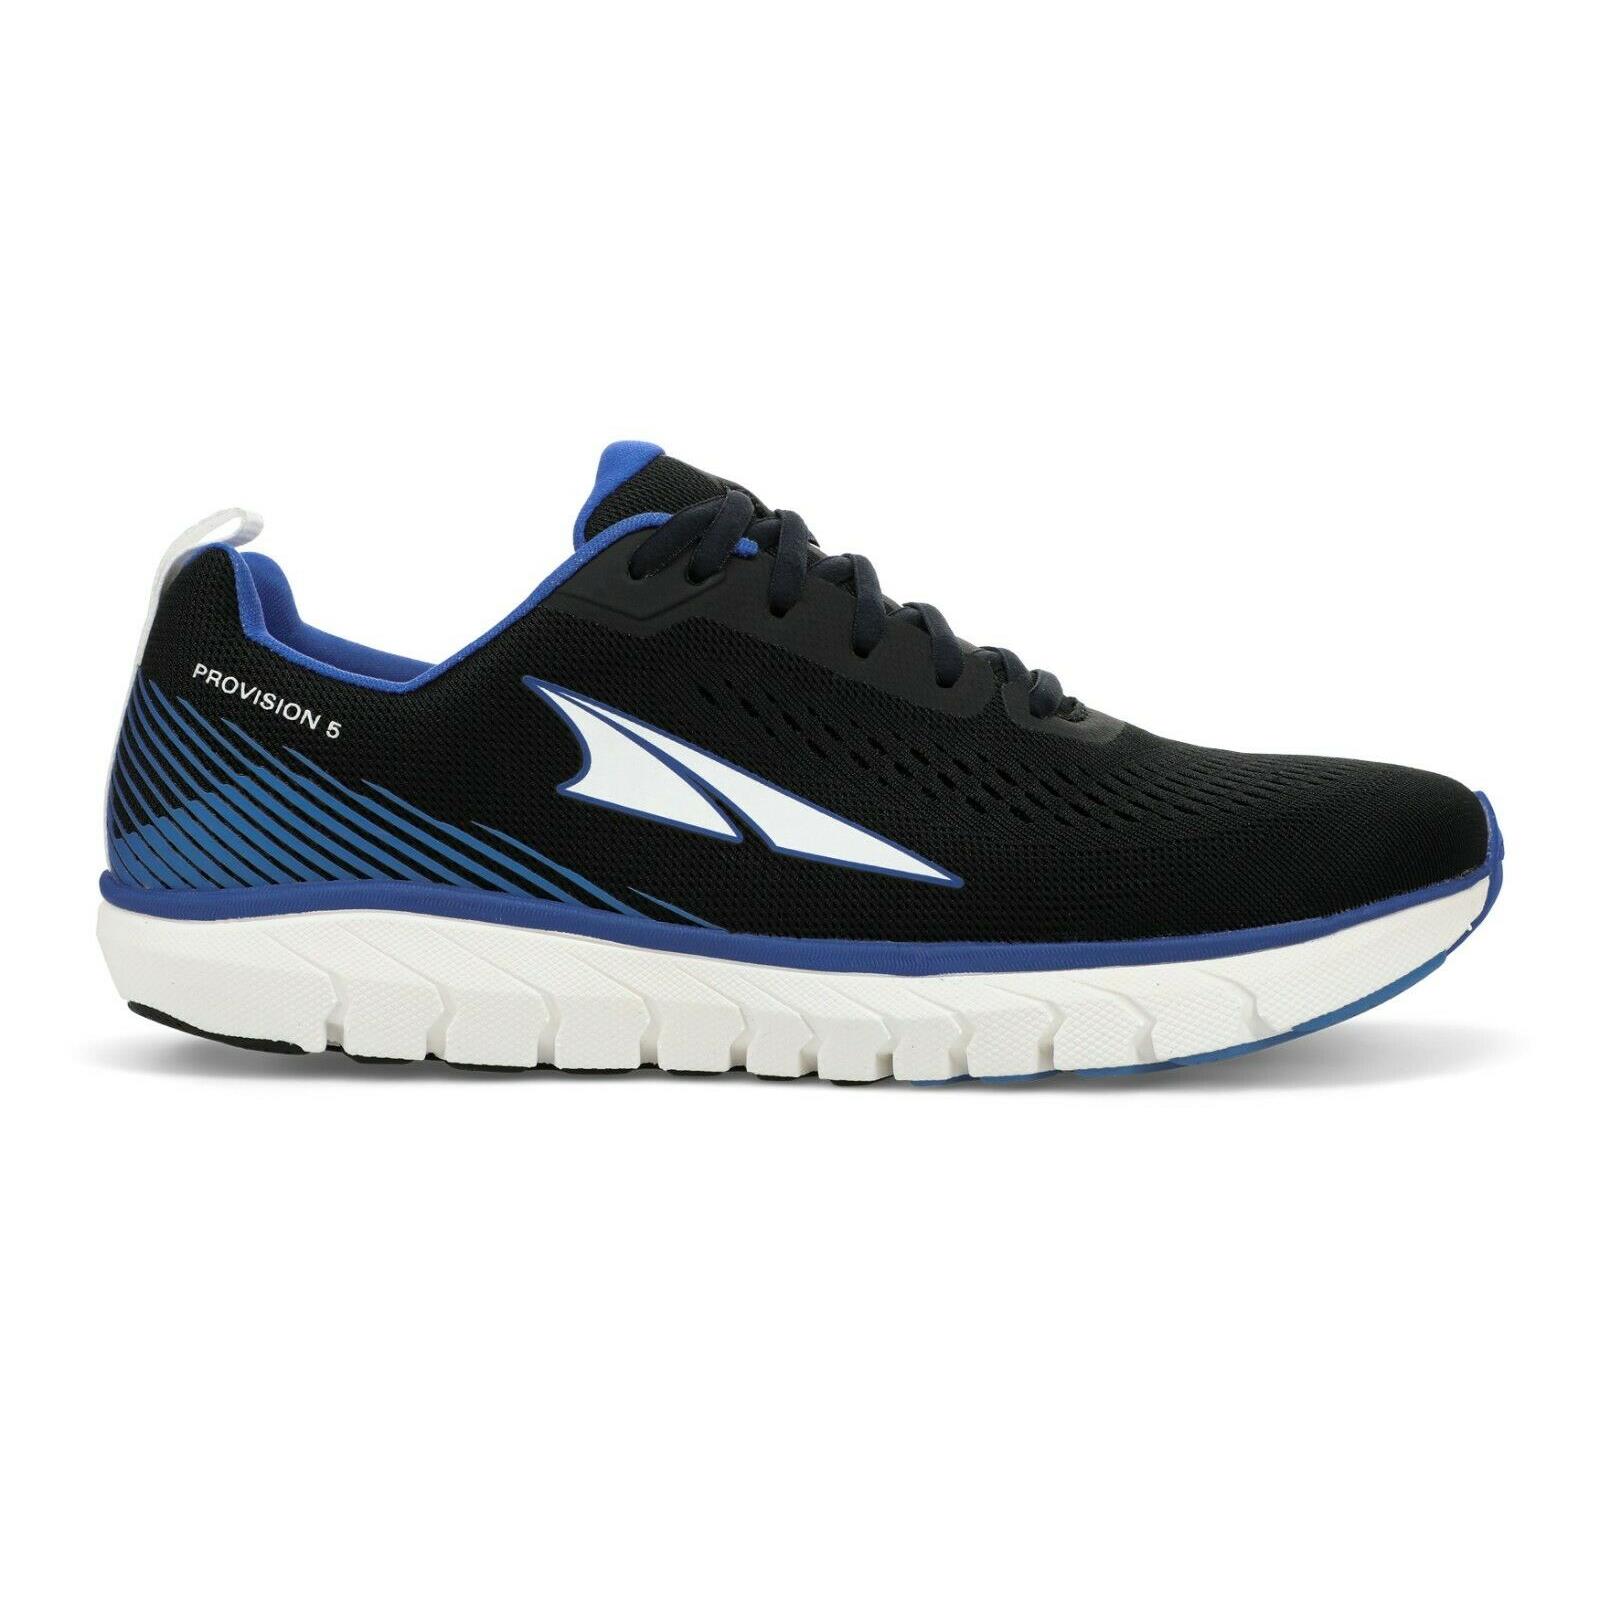 Altra Footwear Women`s Provision 5 Running Shoes - Black/blue